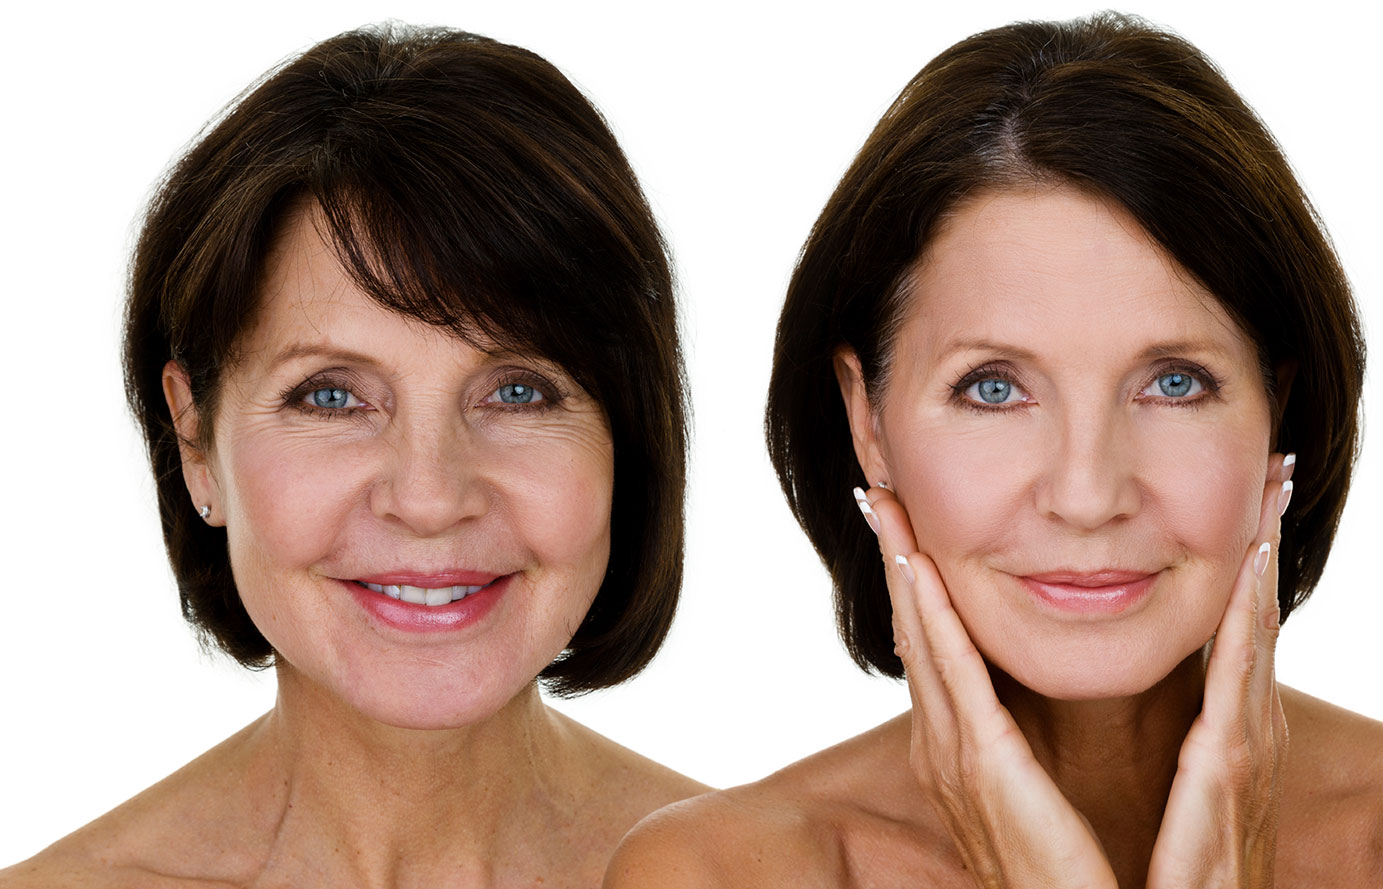 Cost of Facelift Surgery Benefits, Recovery, Results to Expect, etc